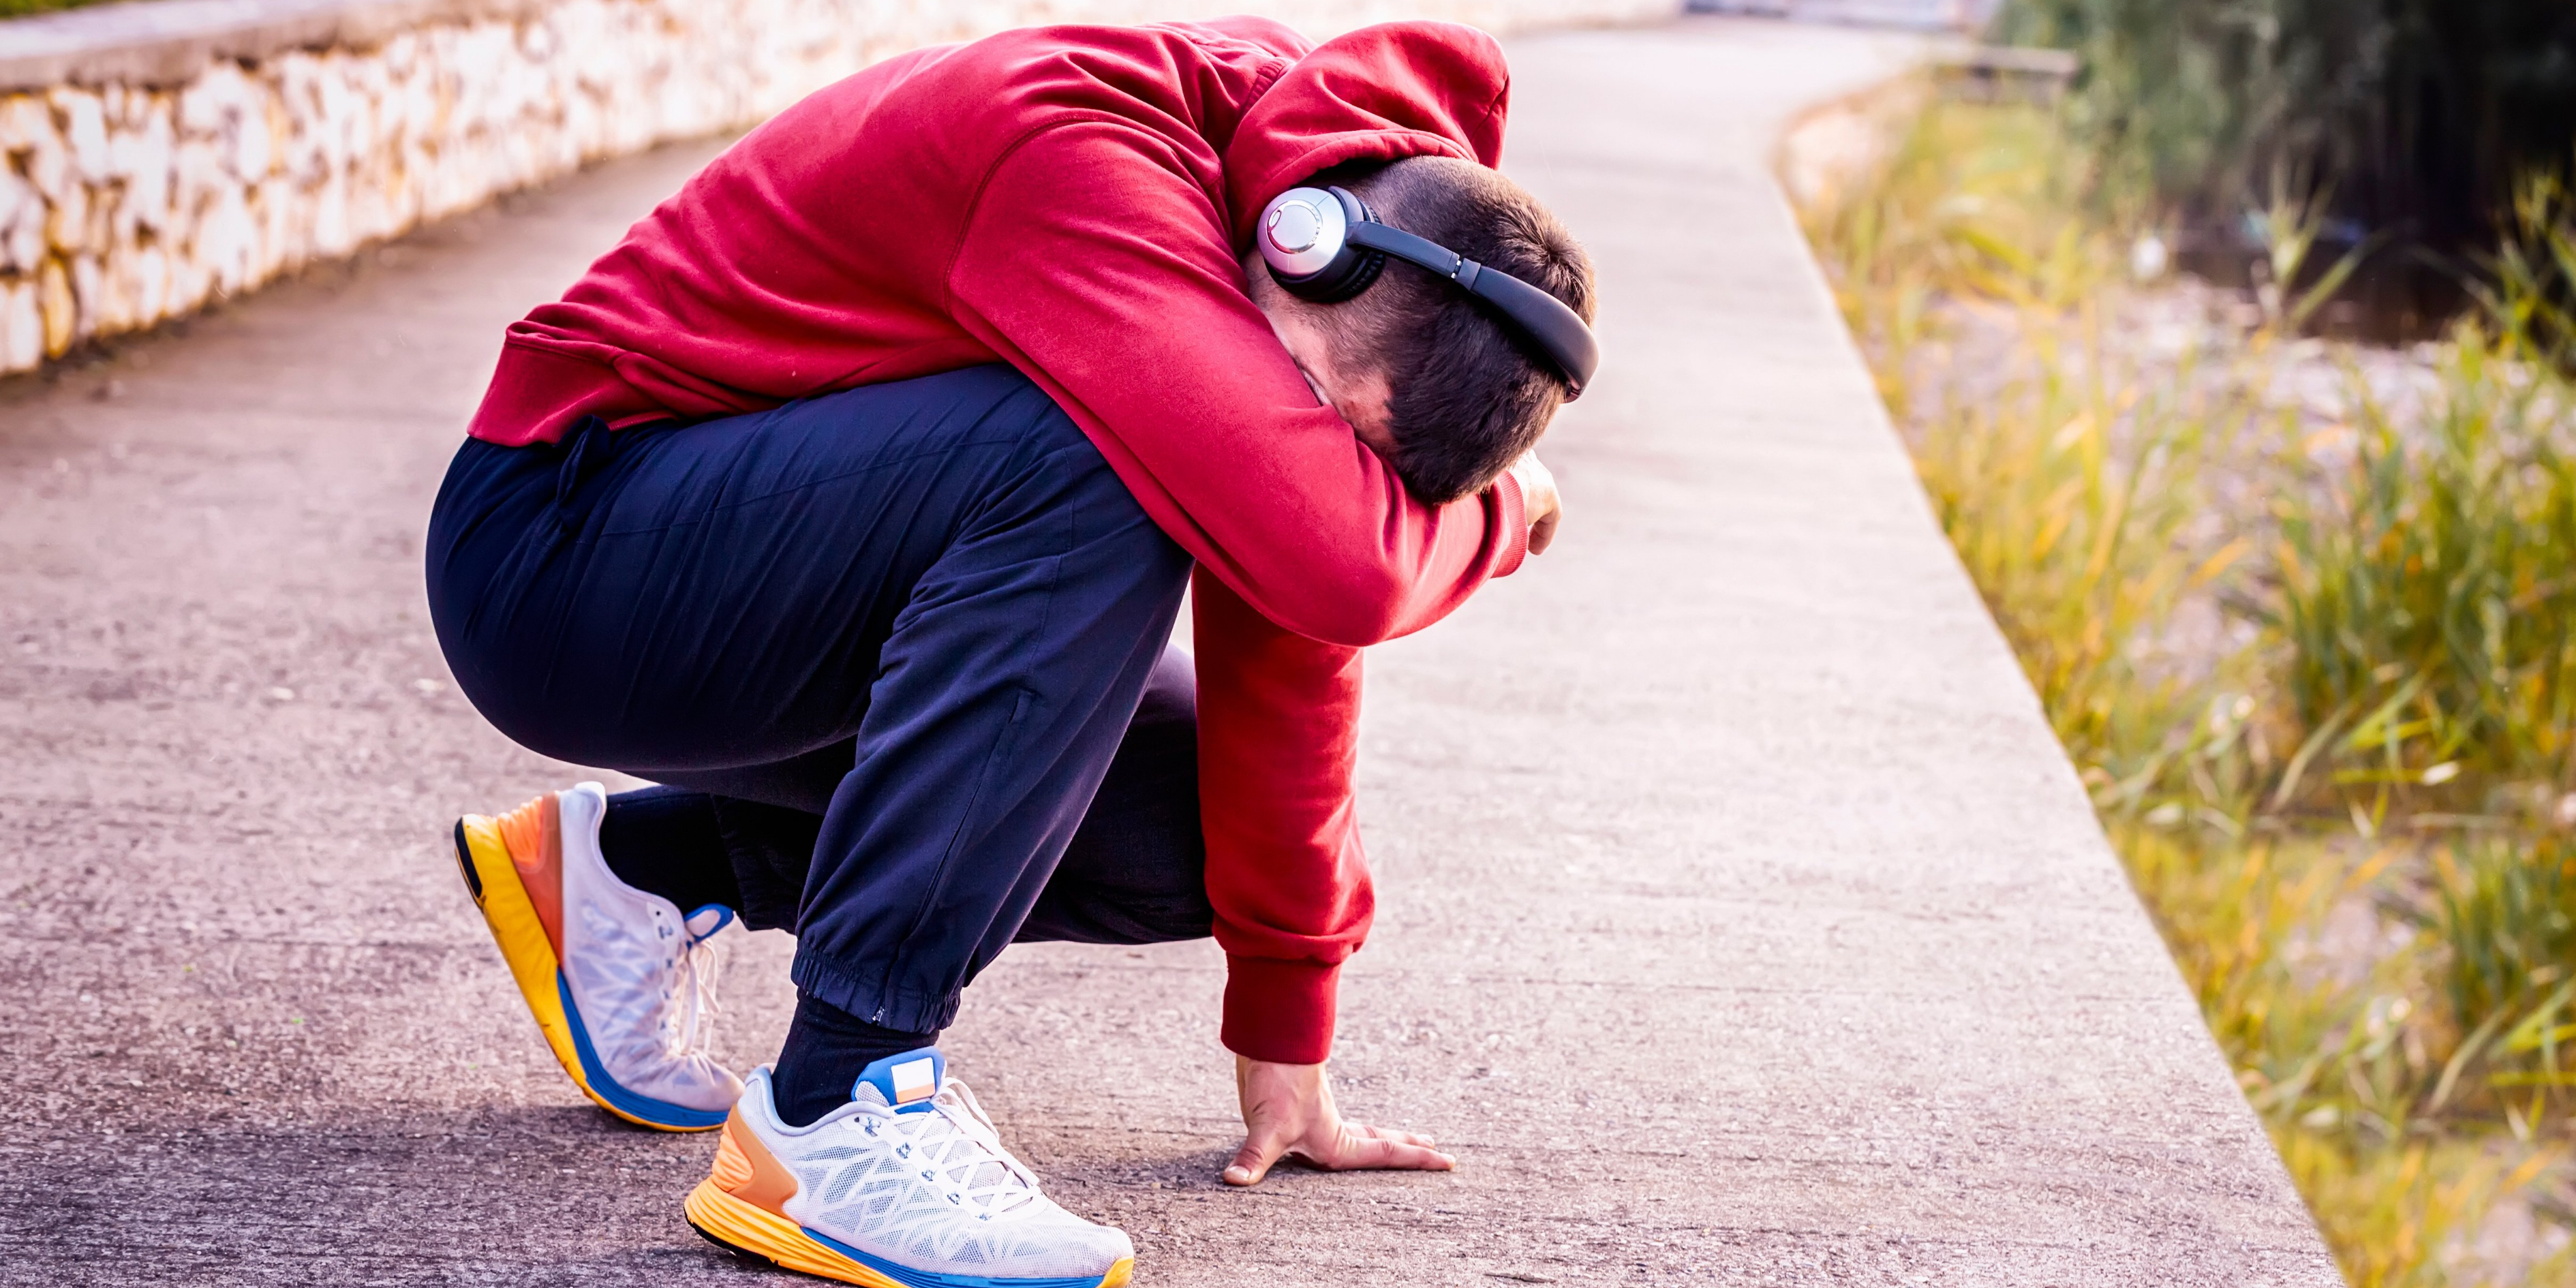 Athlete wearing a red hoodie and headset bending down due to fatigue.